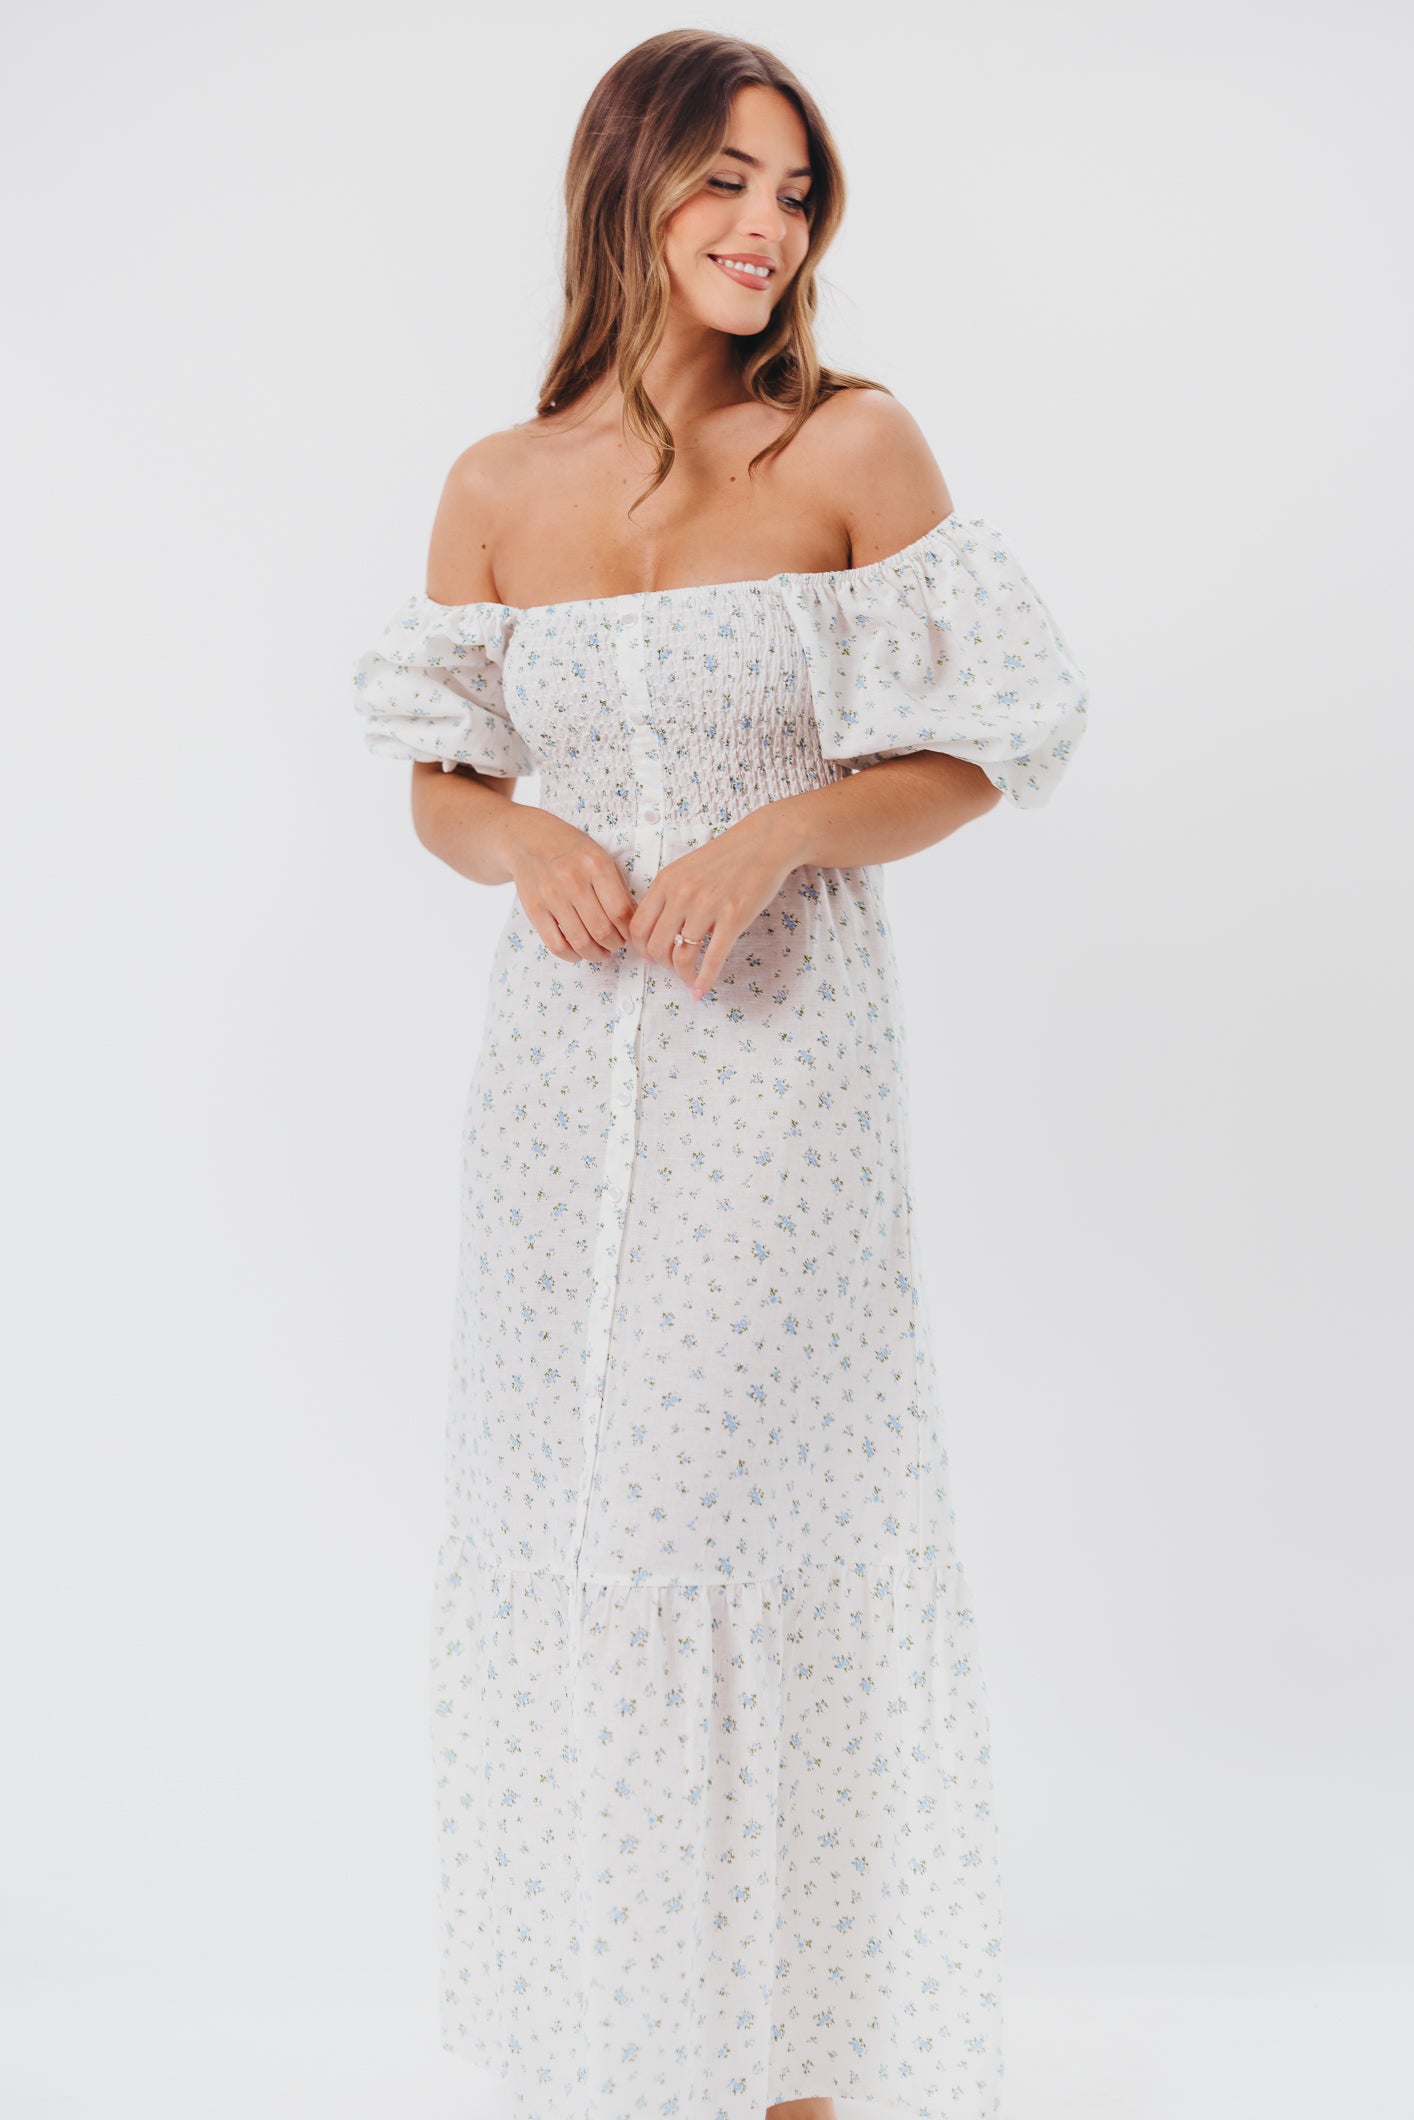 Daisy Maxi Dress in White/Blue Floral